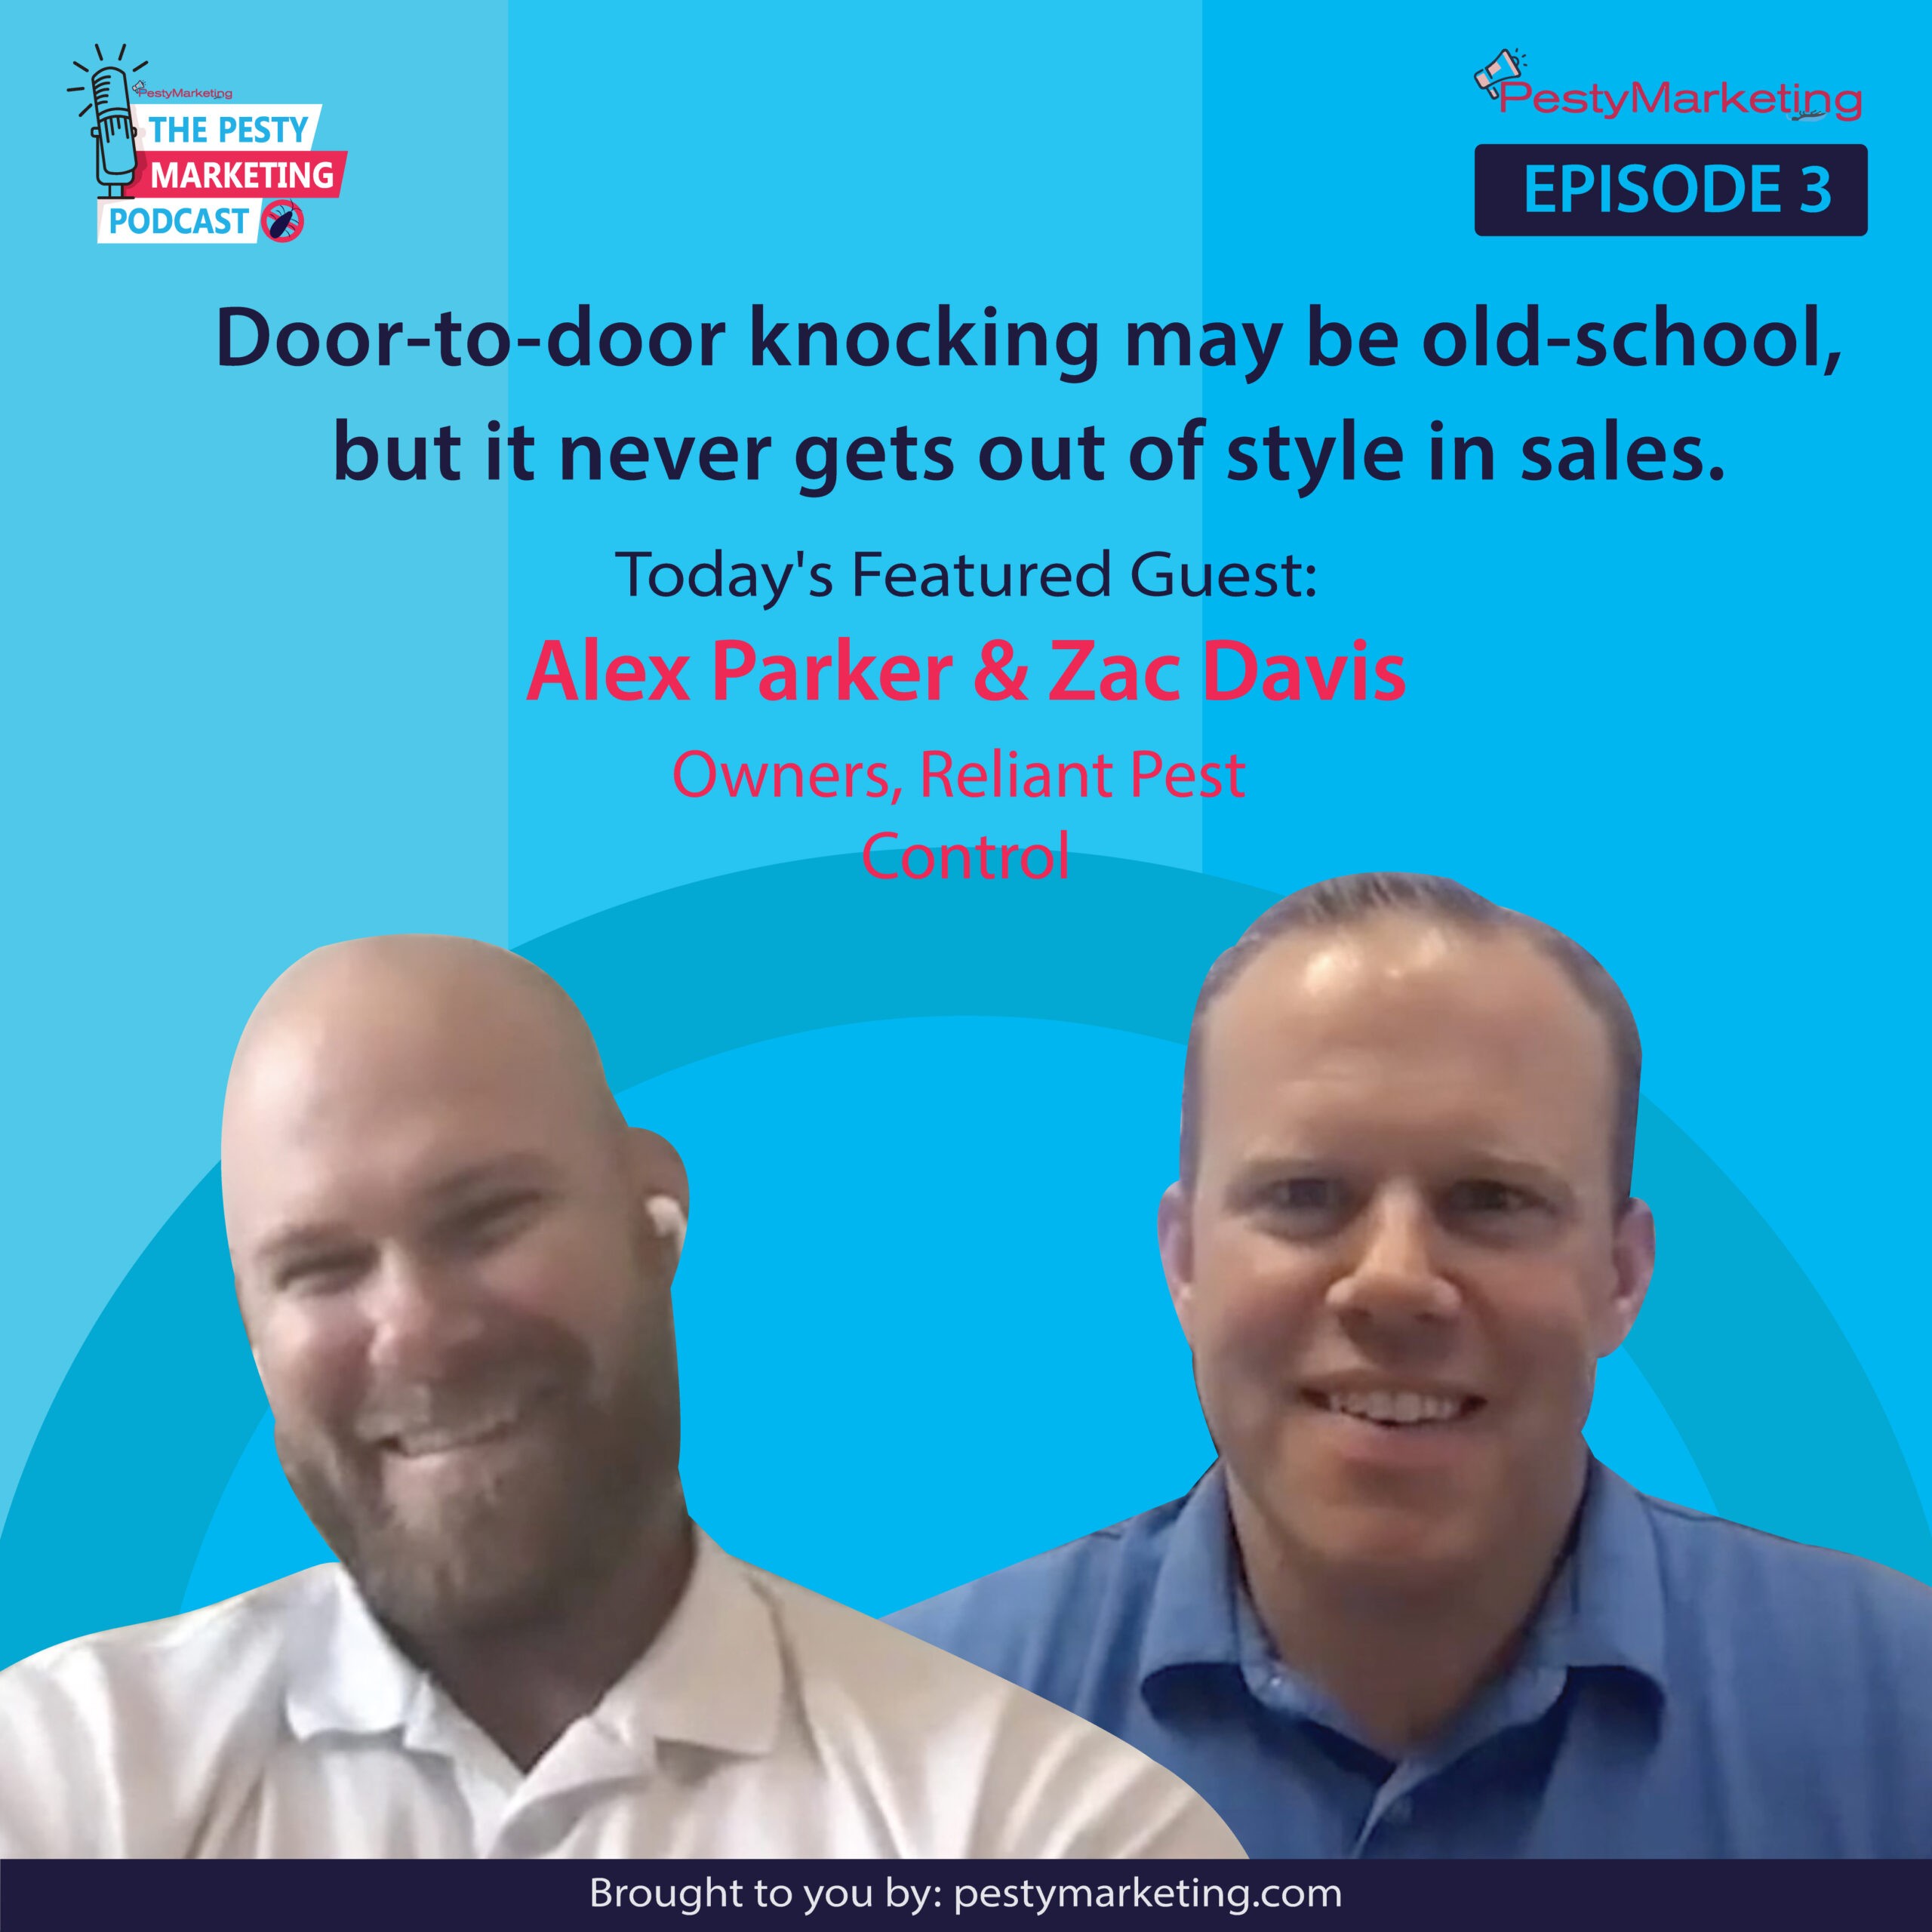 Door-to-door knocking may be old-school, but it never gets out of style in sales (with Alex Parker and Zac Davis)